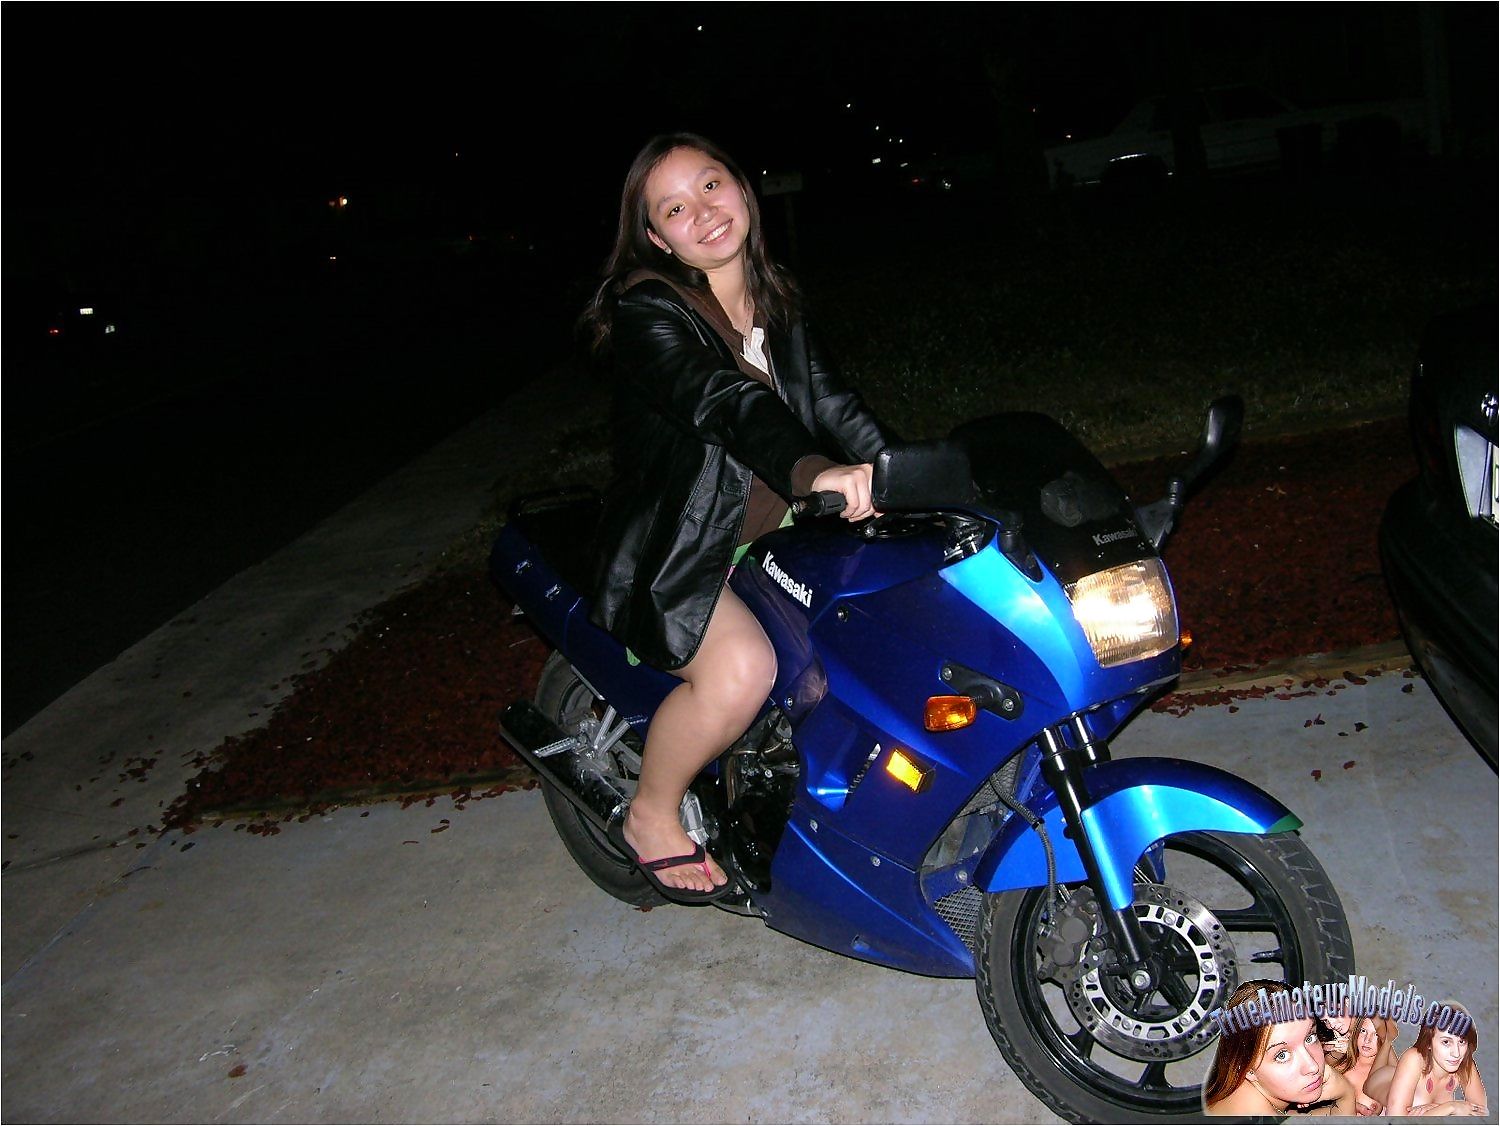 Amateur teen girl spreads nude on motorcycle - part 2211 page 1